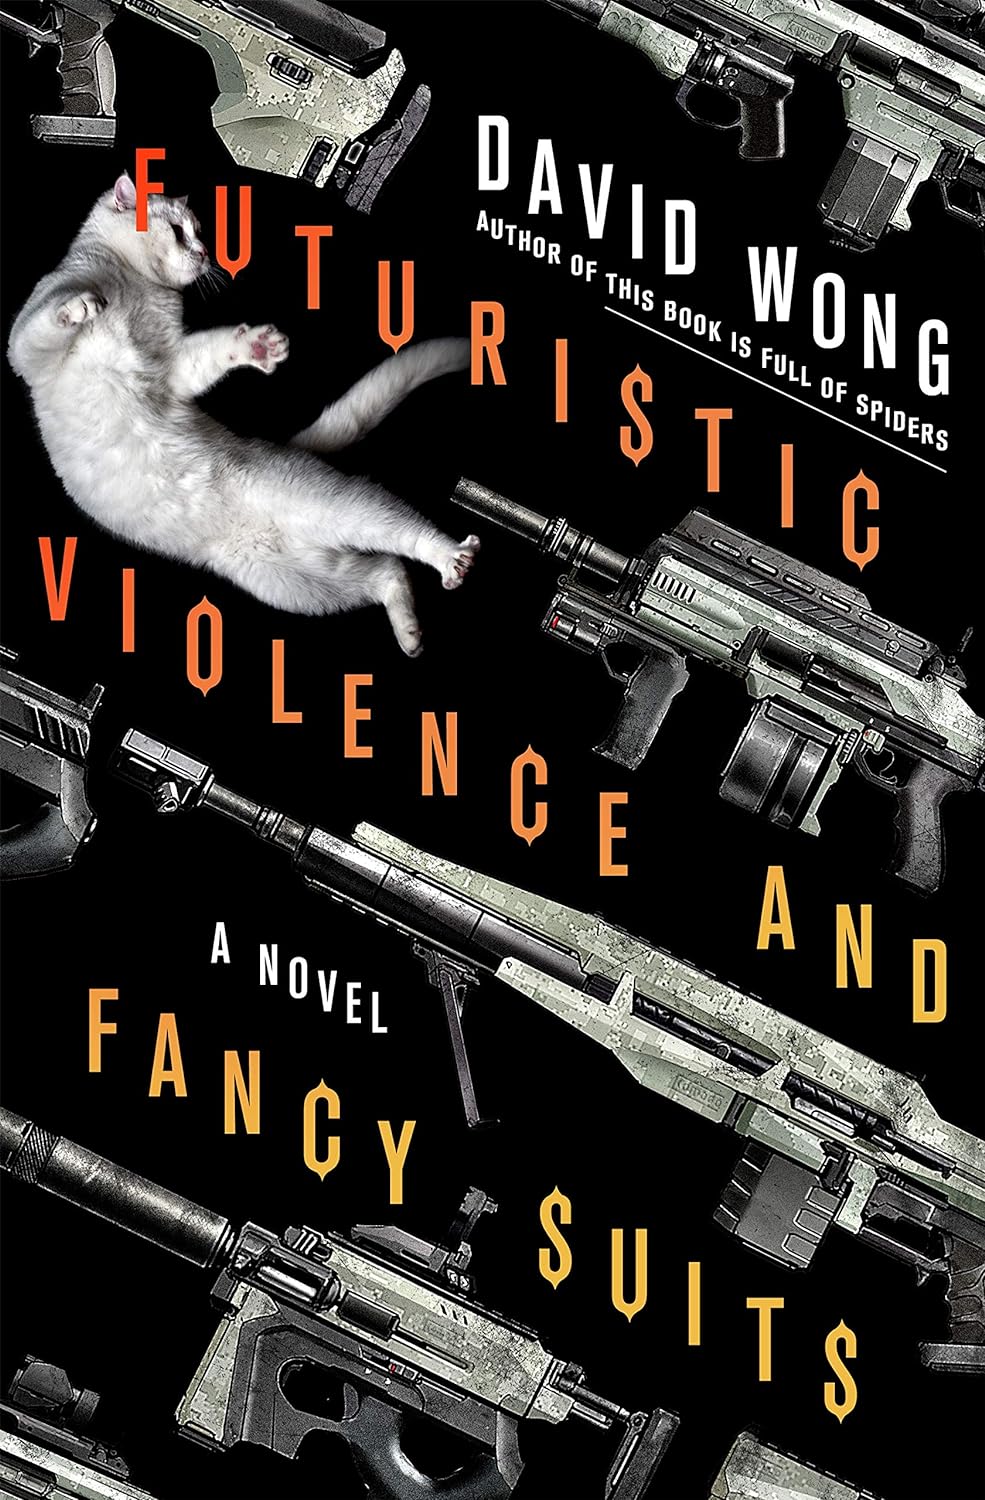 David Wong: Futuristic Violence and Fancy Suits (2016, St. Martin's Griffin)